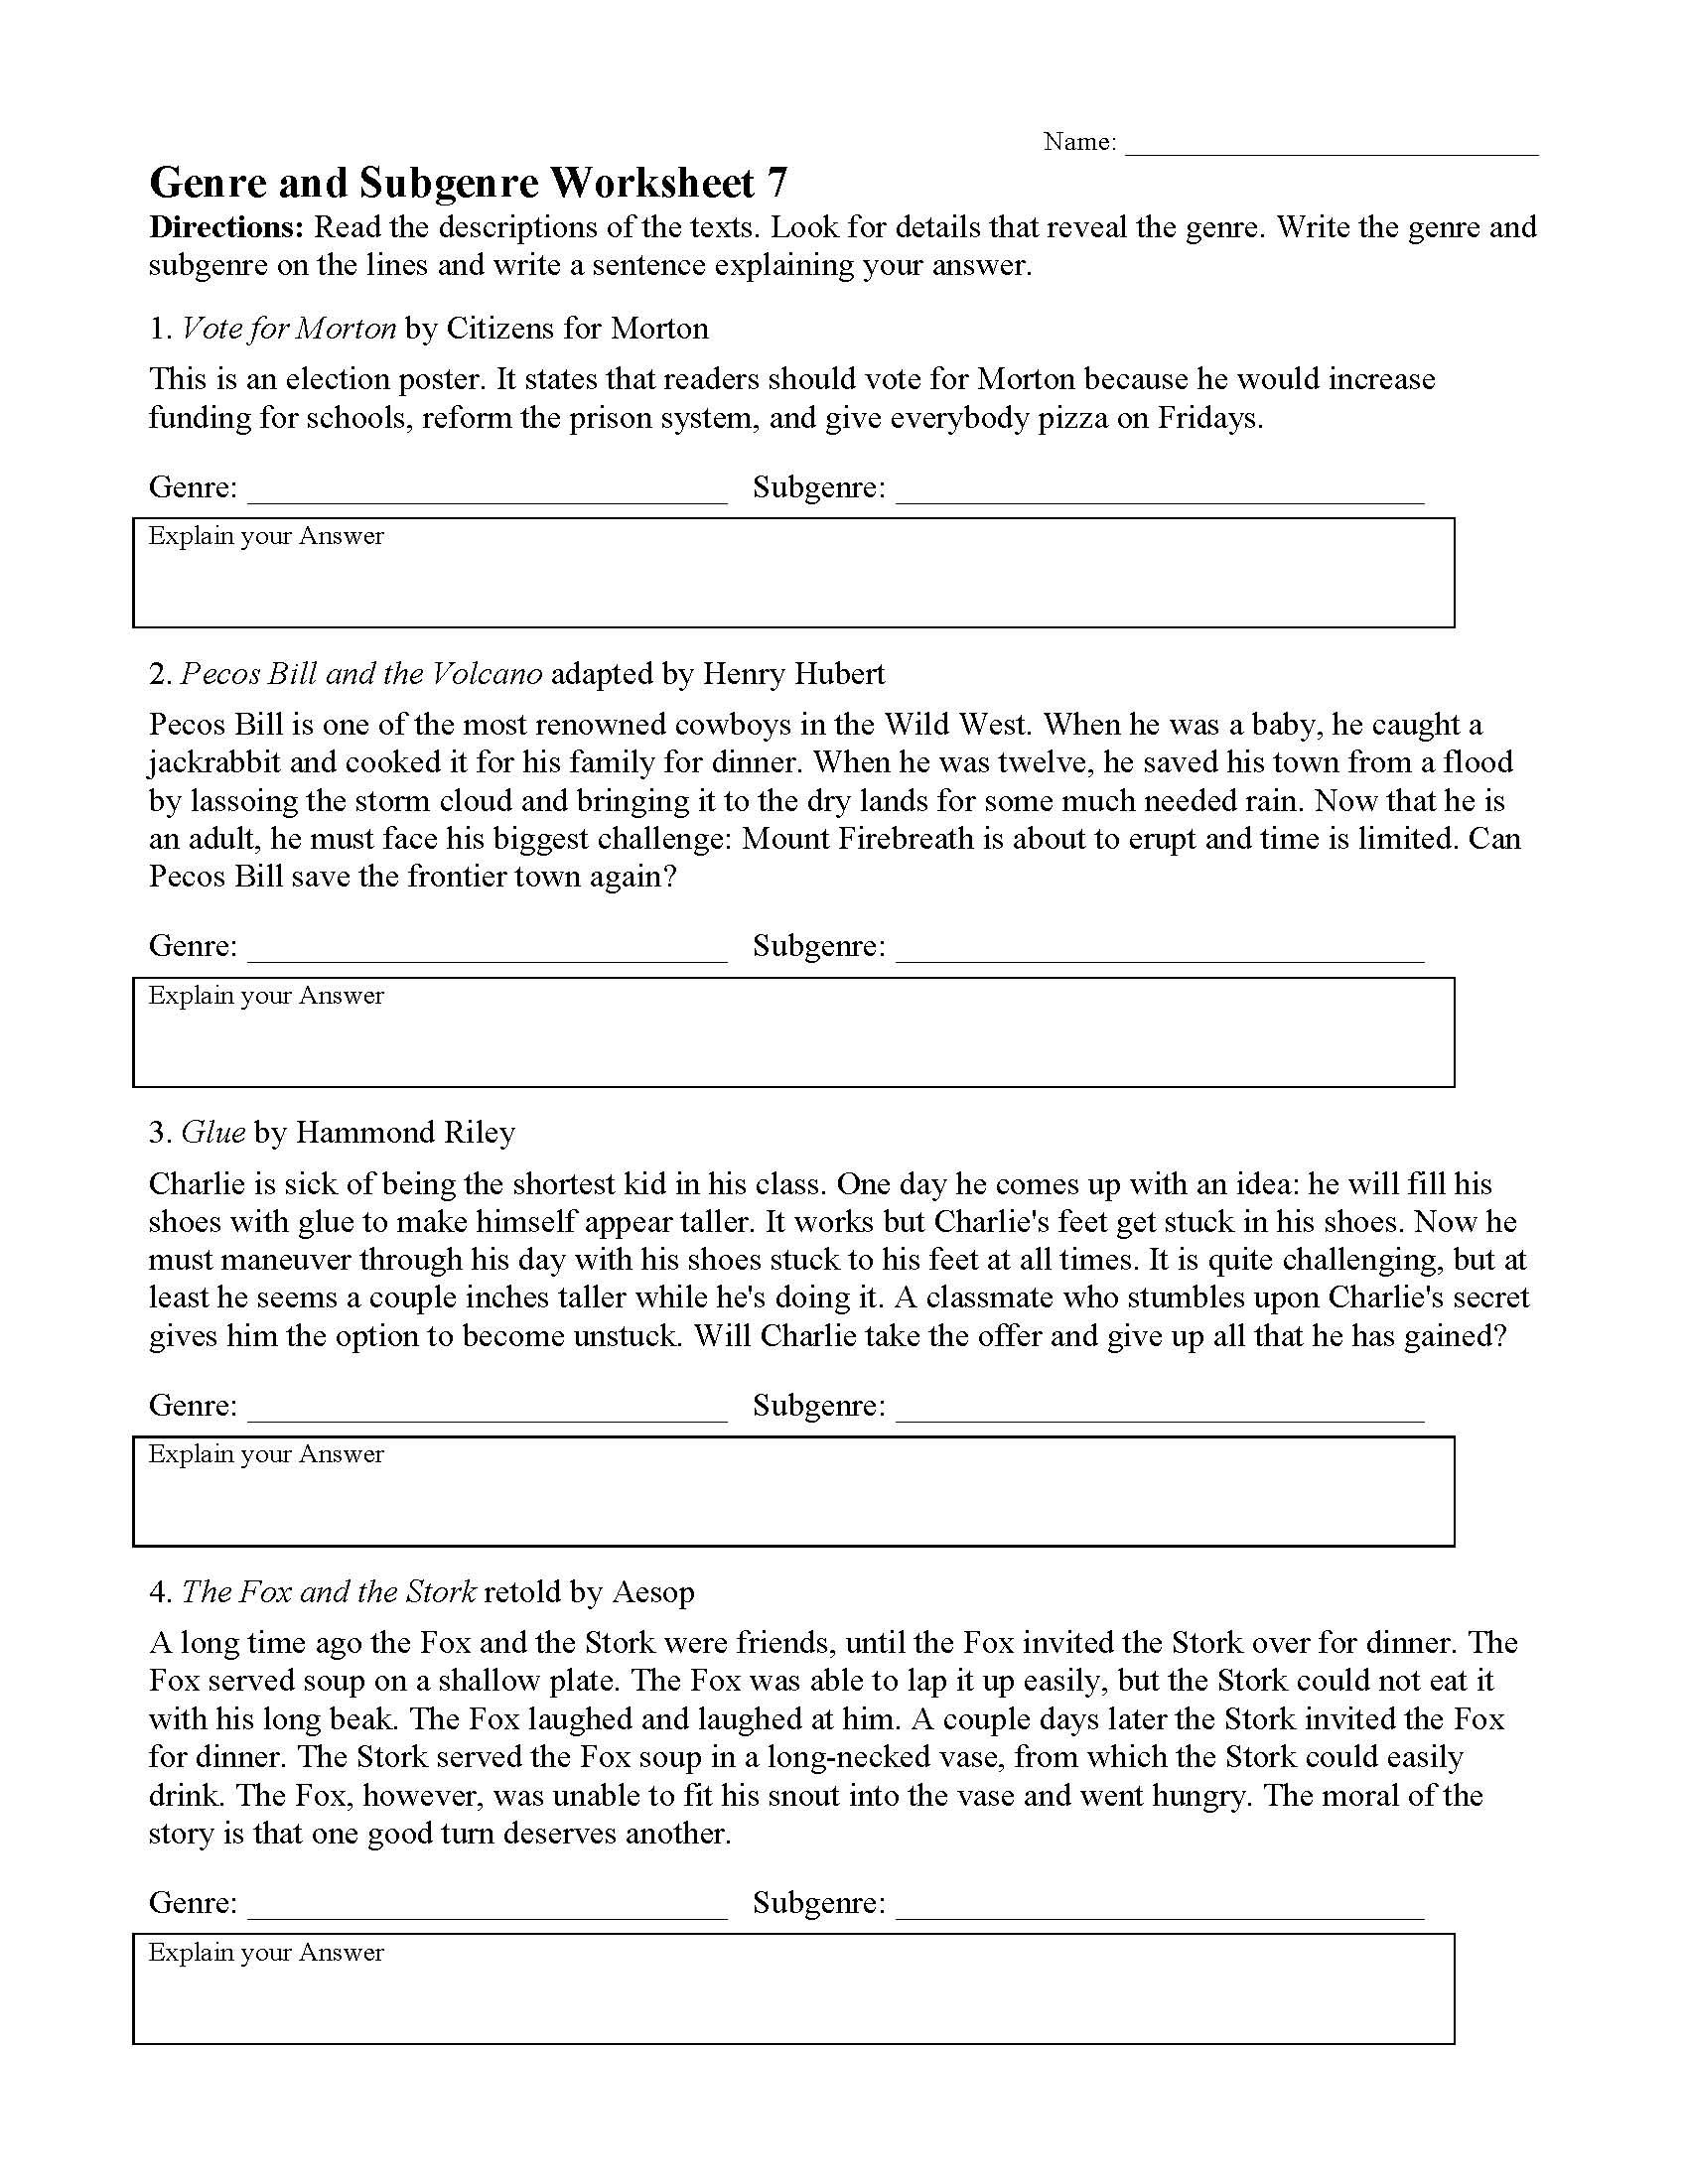 This is a preview image of Genre Worksheet 7. Click on it to enlarge it or view the source file.